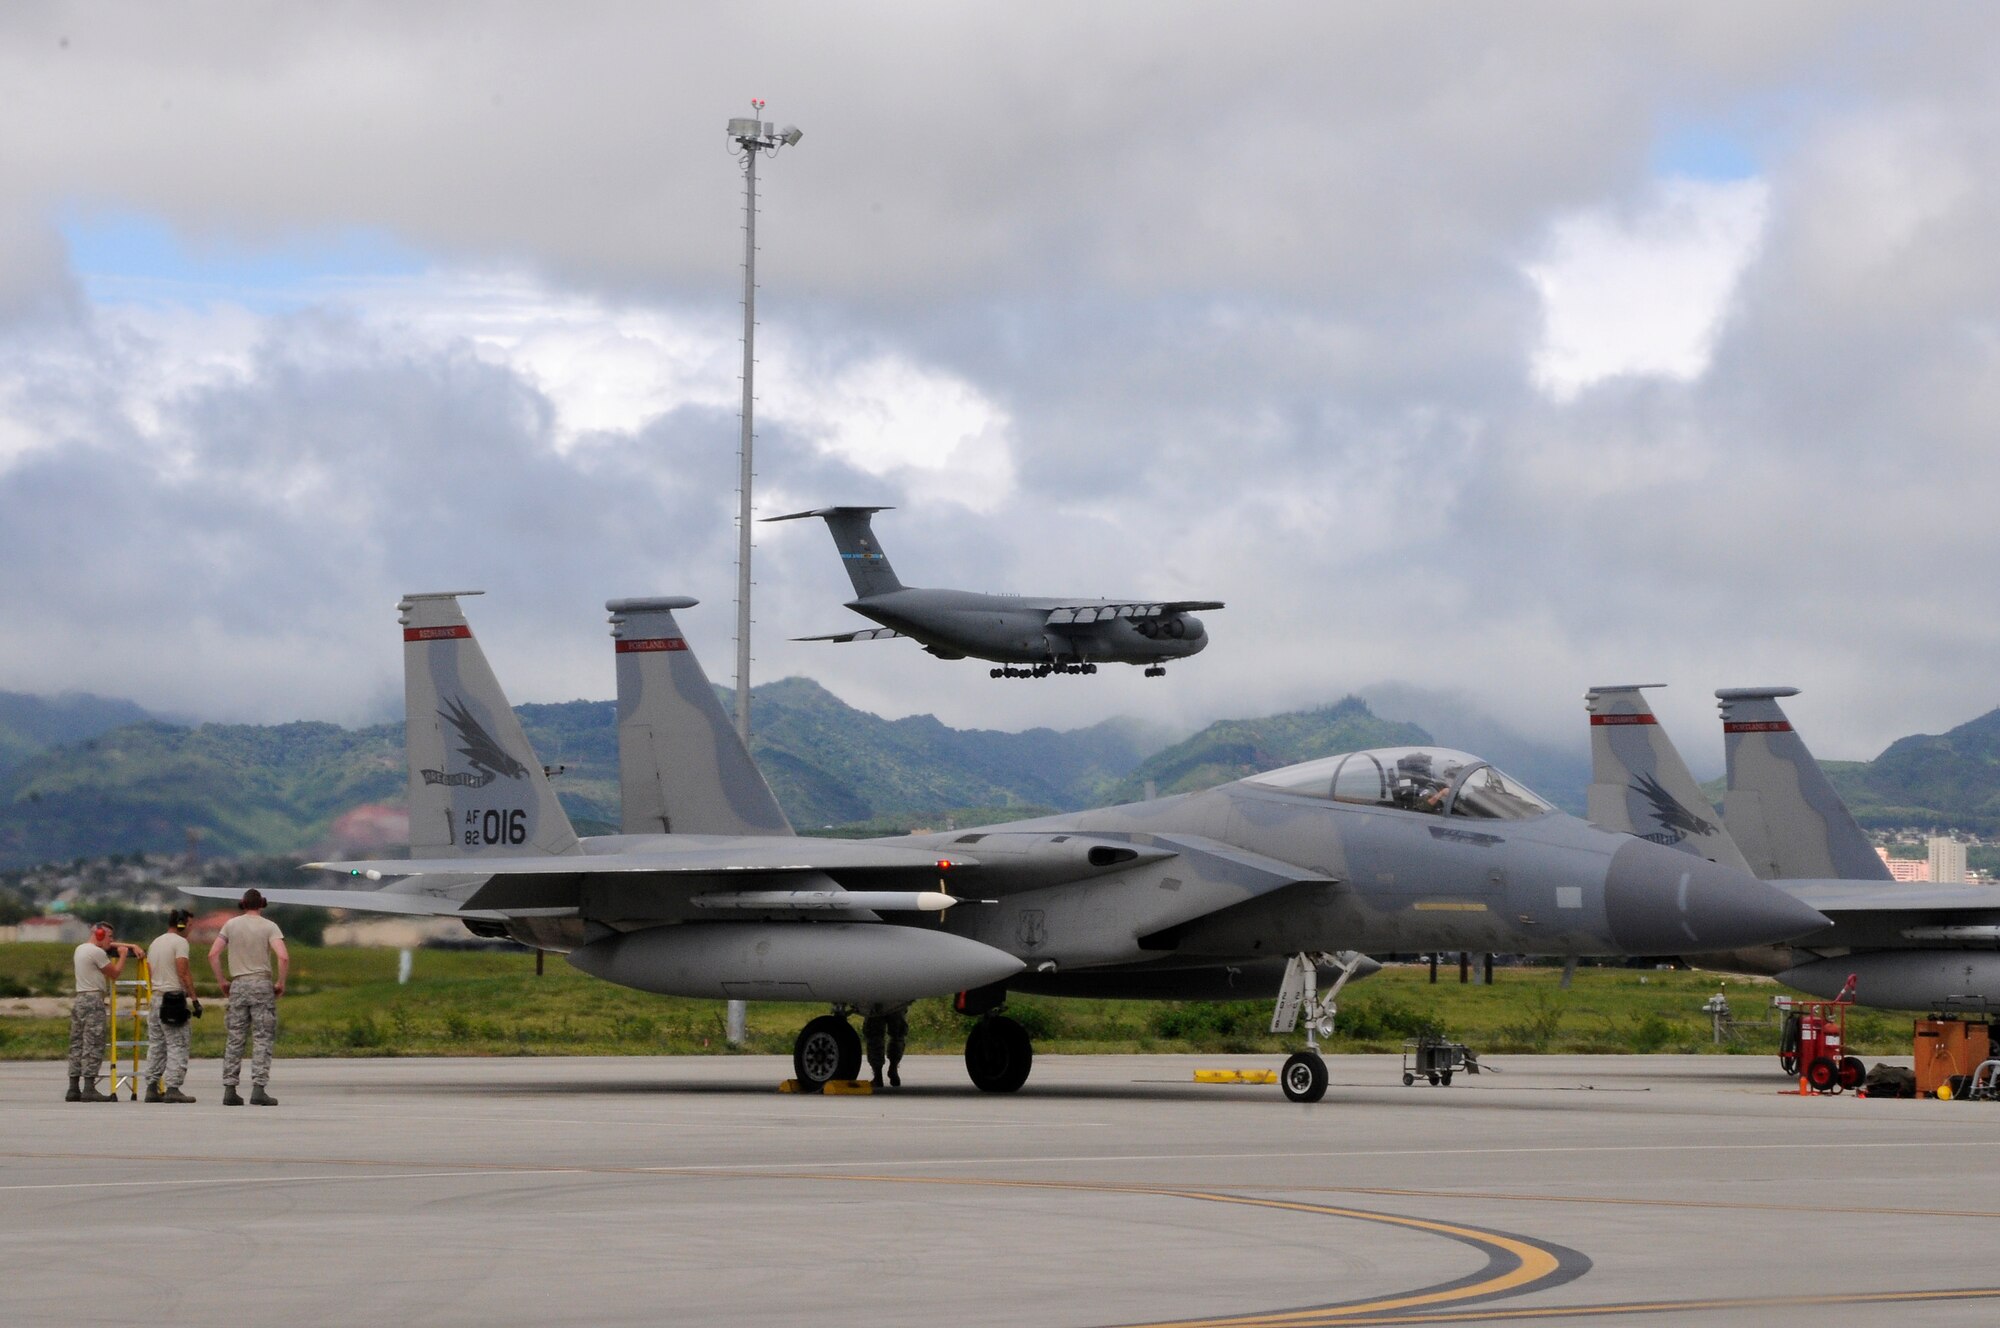 Members of the 142nd Fighter Wing participate in a Sentry Aloha exercise August 16, 2016 at Joint Base Pearl Harbor-Hickam, Hawaii.  Sentry Aloha is a training exercise hosted by the Hawaiian Air National Guard base to train pilots on combat tactics.  (Air National Guard photo by Tech. Sgt. Emily Thompson/Released)